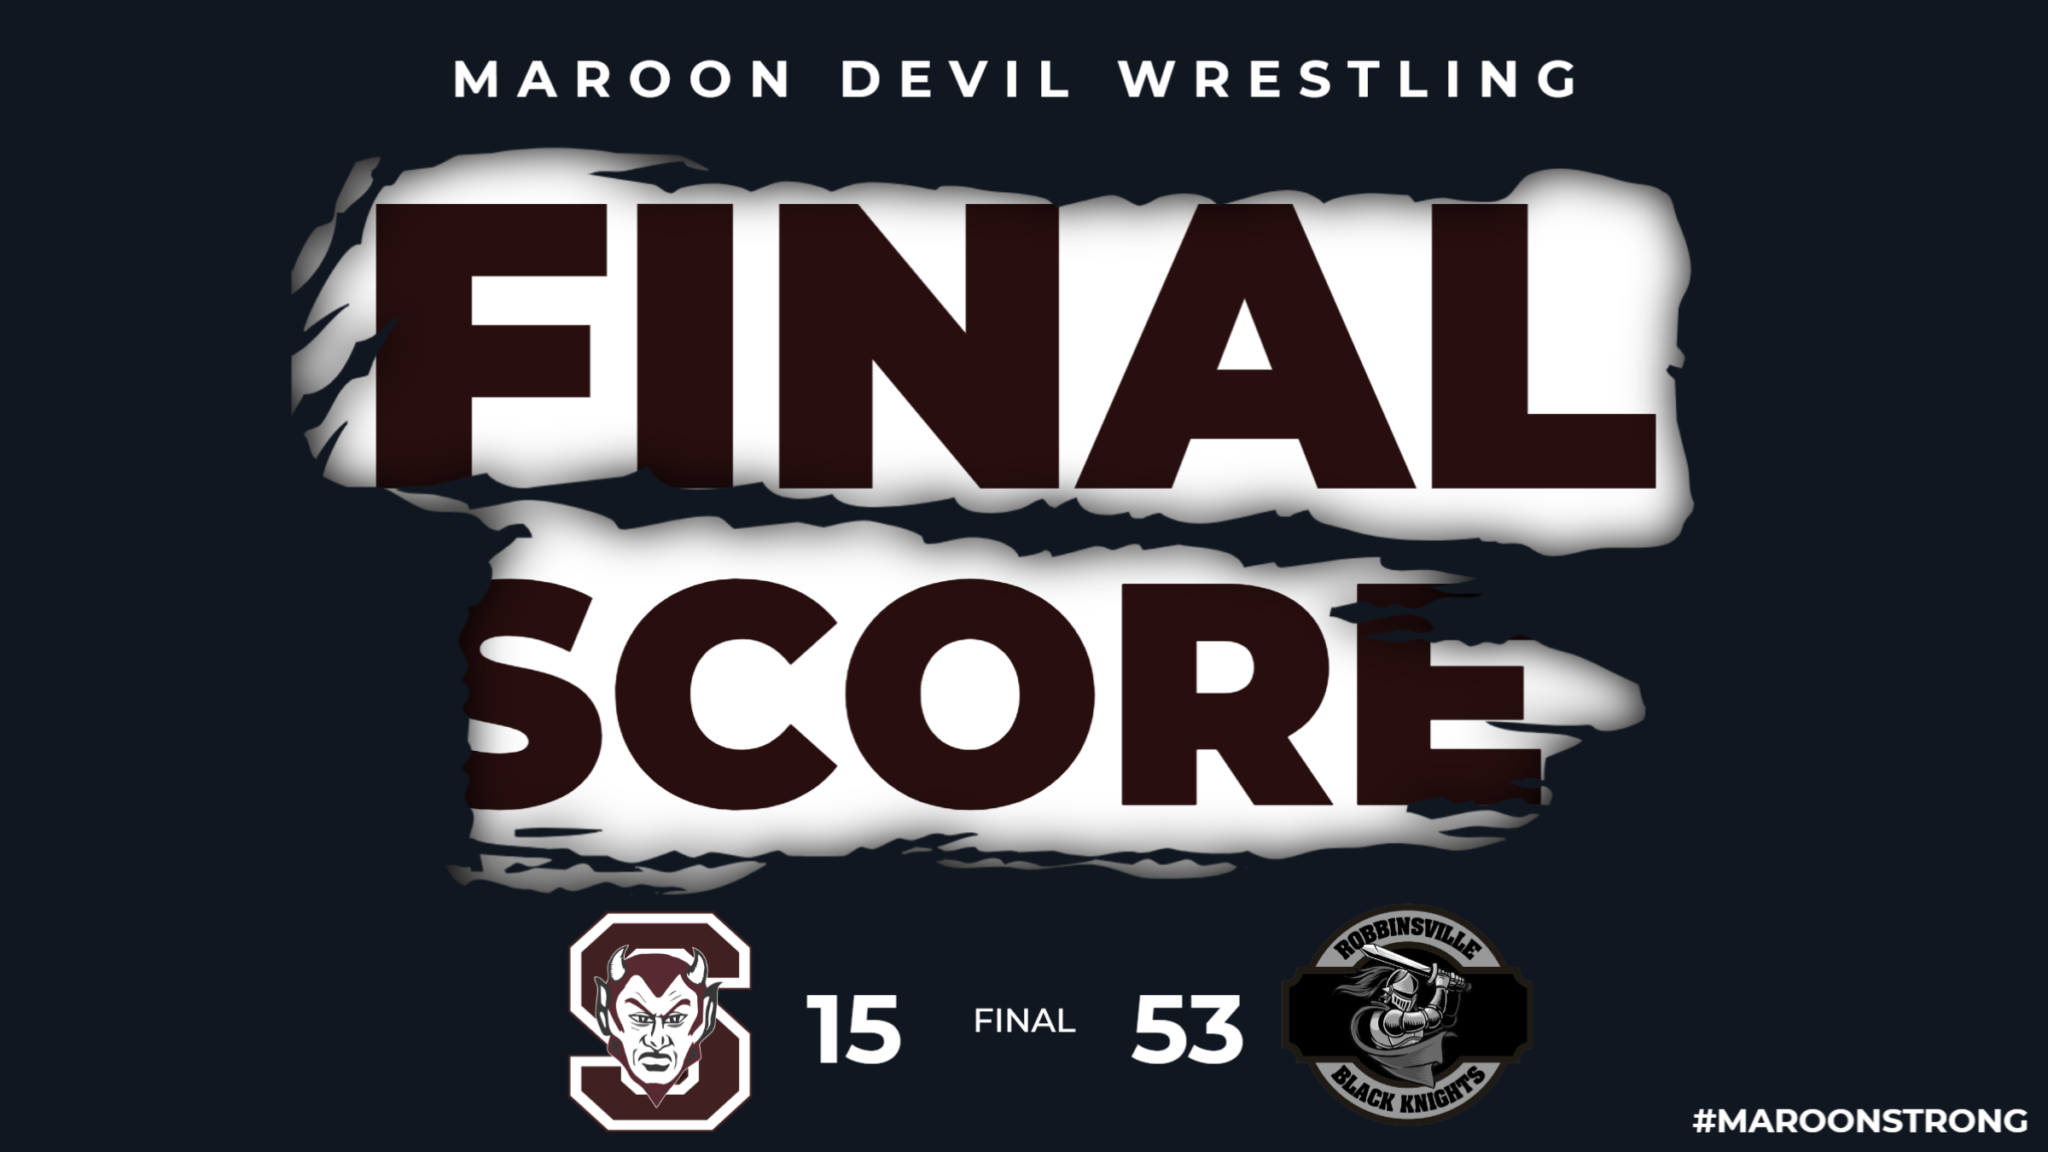 banner of the final score on wrestling competition, score was 15-53, devils maroon lost